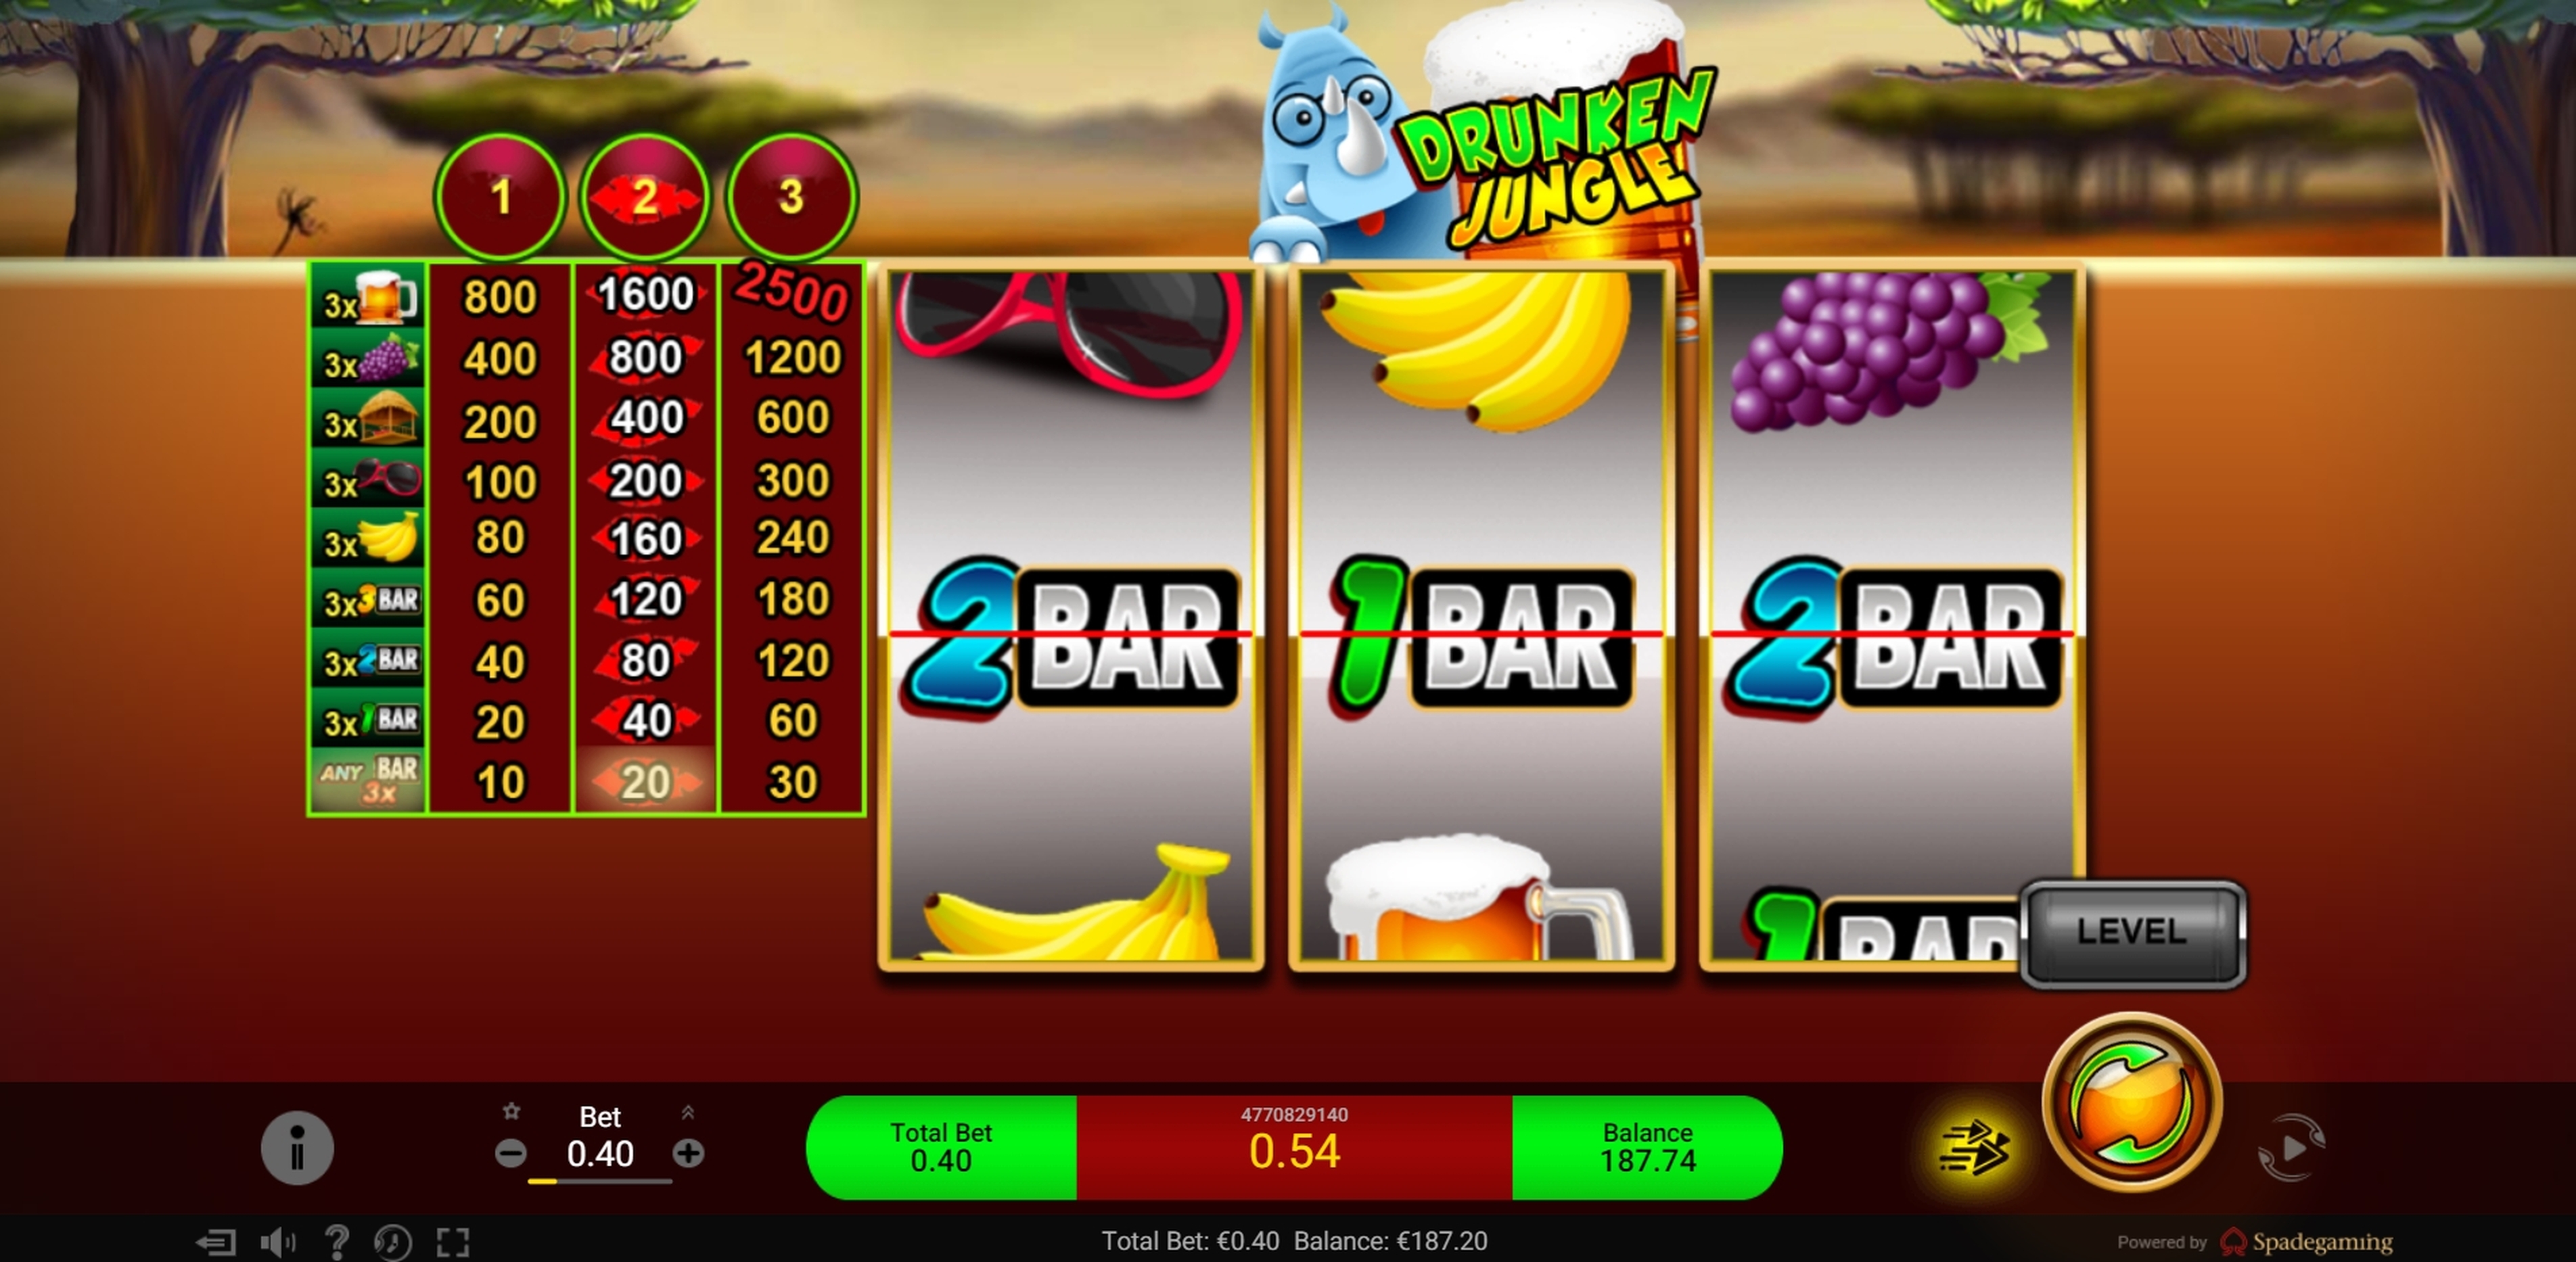 Win Money in Drunken Jungle Free Slot Game by Spade Gaming